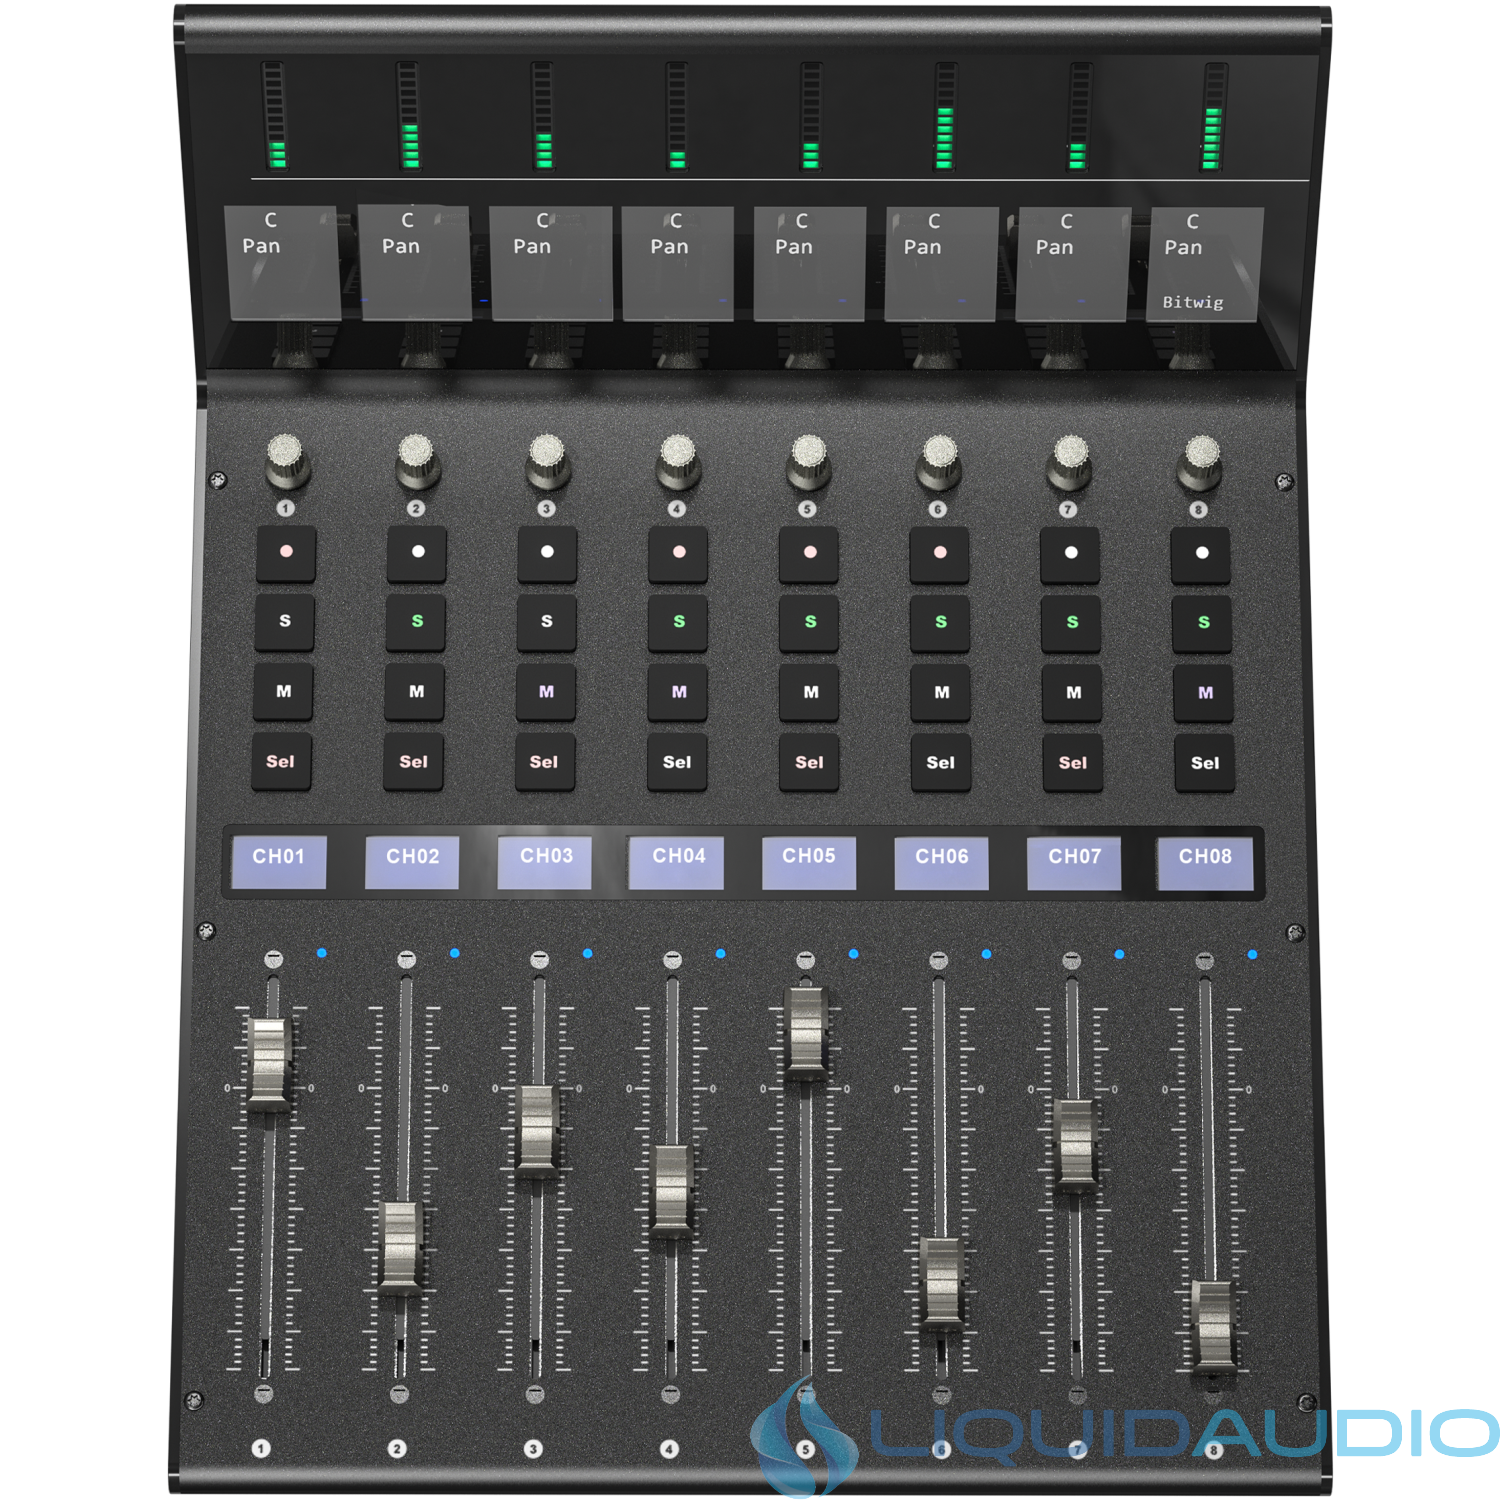 iCON Pro Audio V1-X Extender for V1-M DAW Control Surface with Motorized Faders